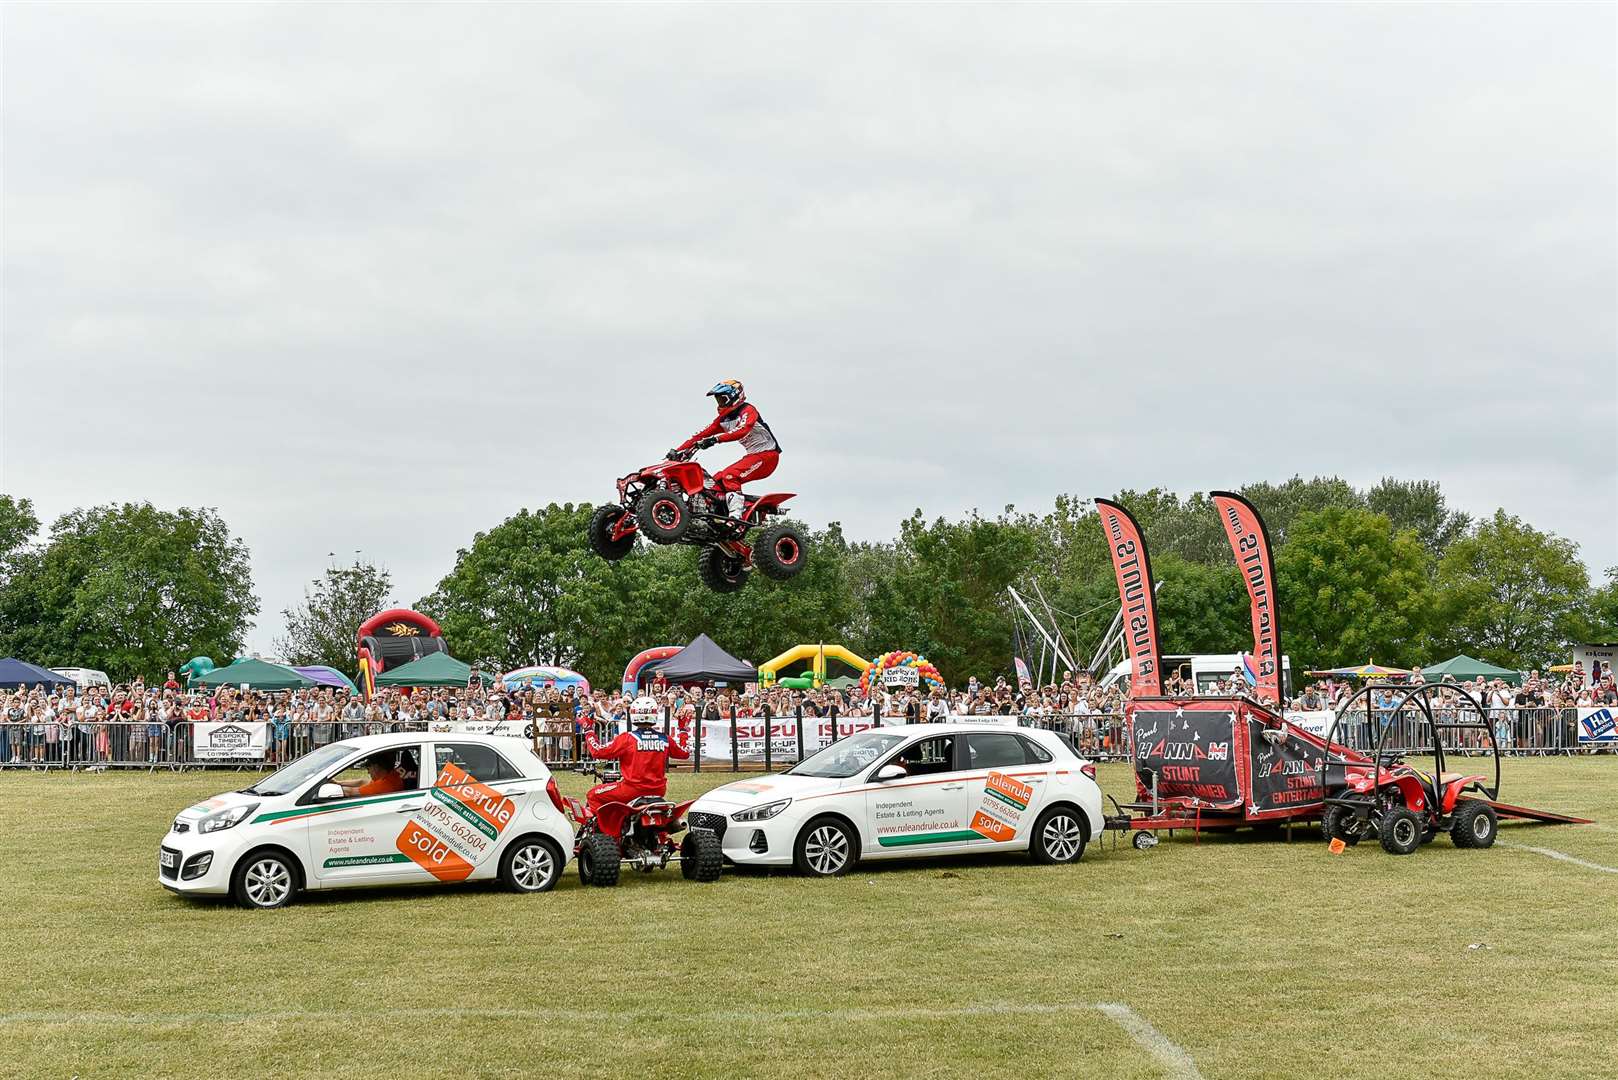 Paul Hannam Quad Stunt Bike Show performing at the Sheppey Summer Spectacular. Picture: Tony Jones (13768422)